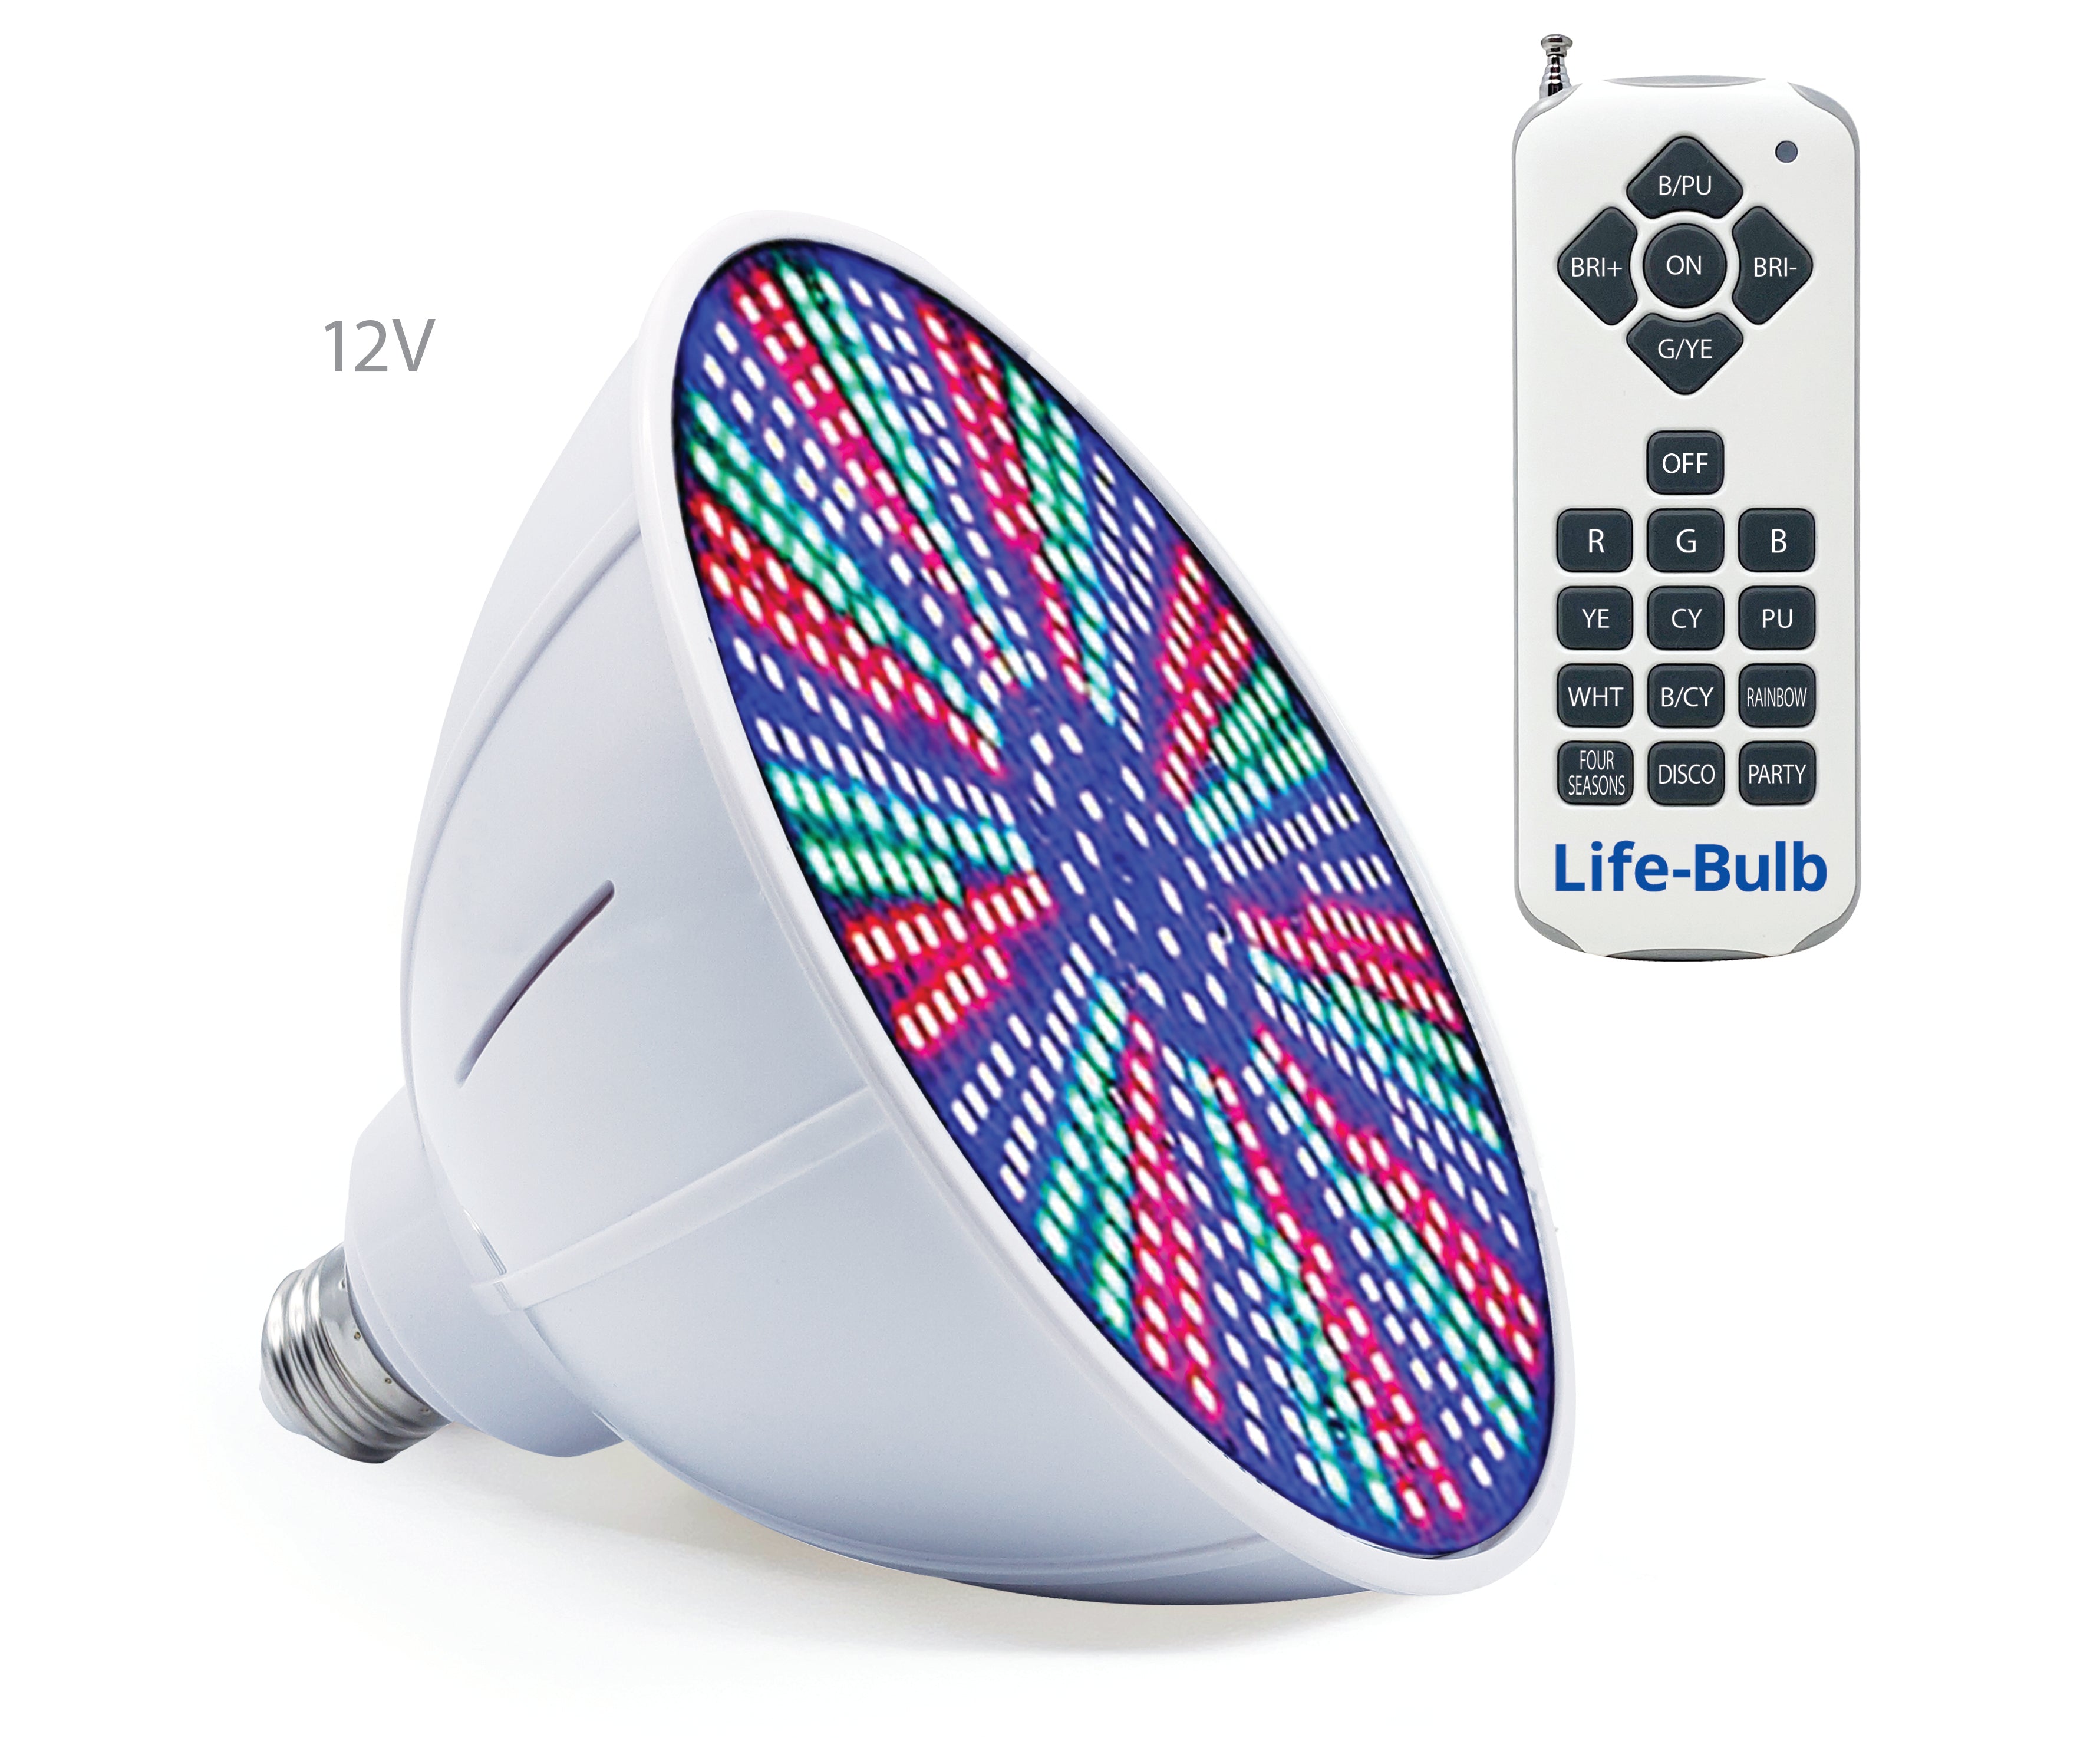 Life-Bulb 12V 40W RGB [Switch or Remote Control] LED Pool Light Bulb | Color Changing | Lifetime Replacement Warranty | Replacement Bulb for Pentair and Hayward Fixture